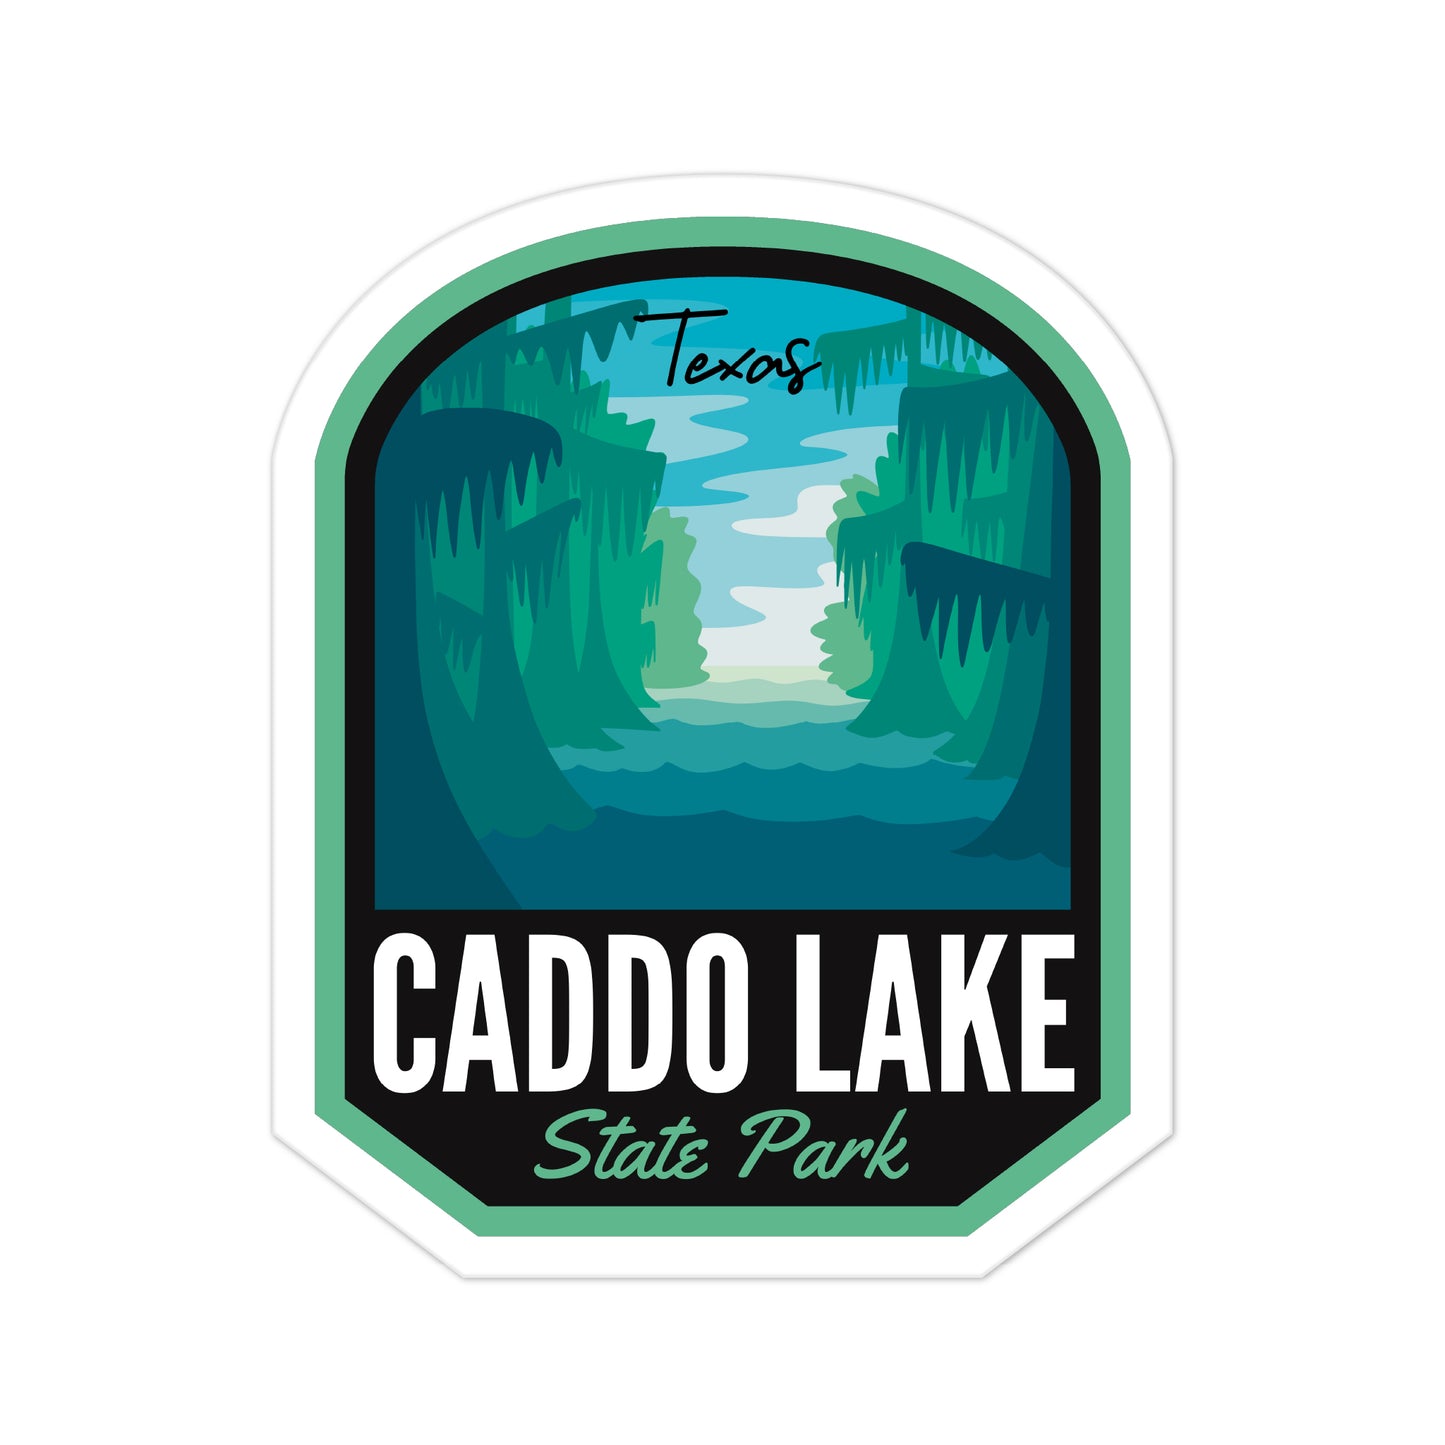 A sticker of Caddo Lake State Park